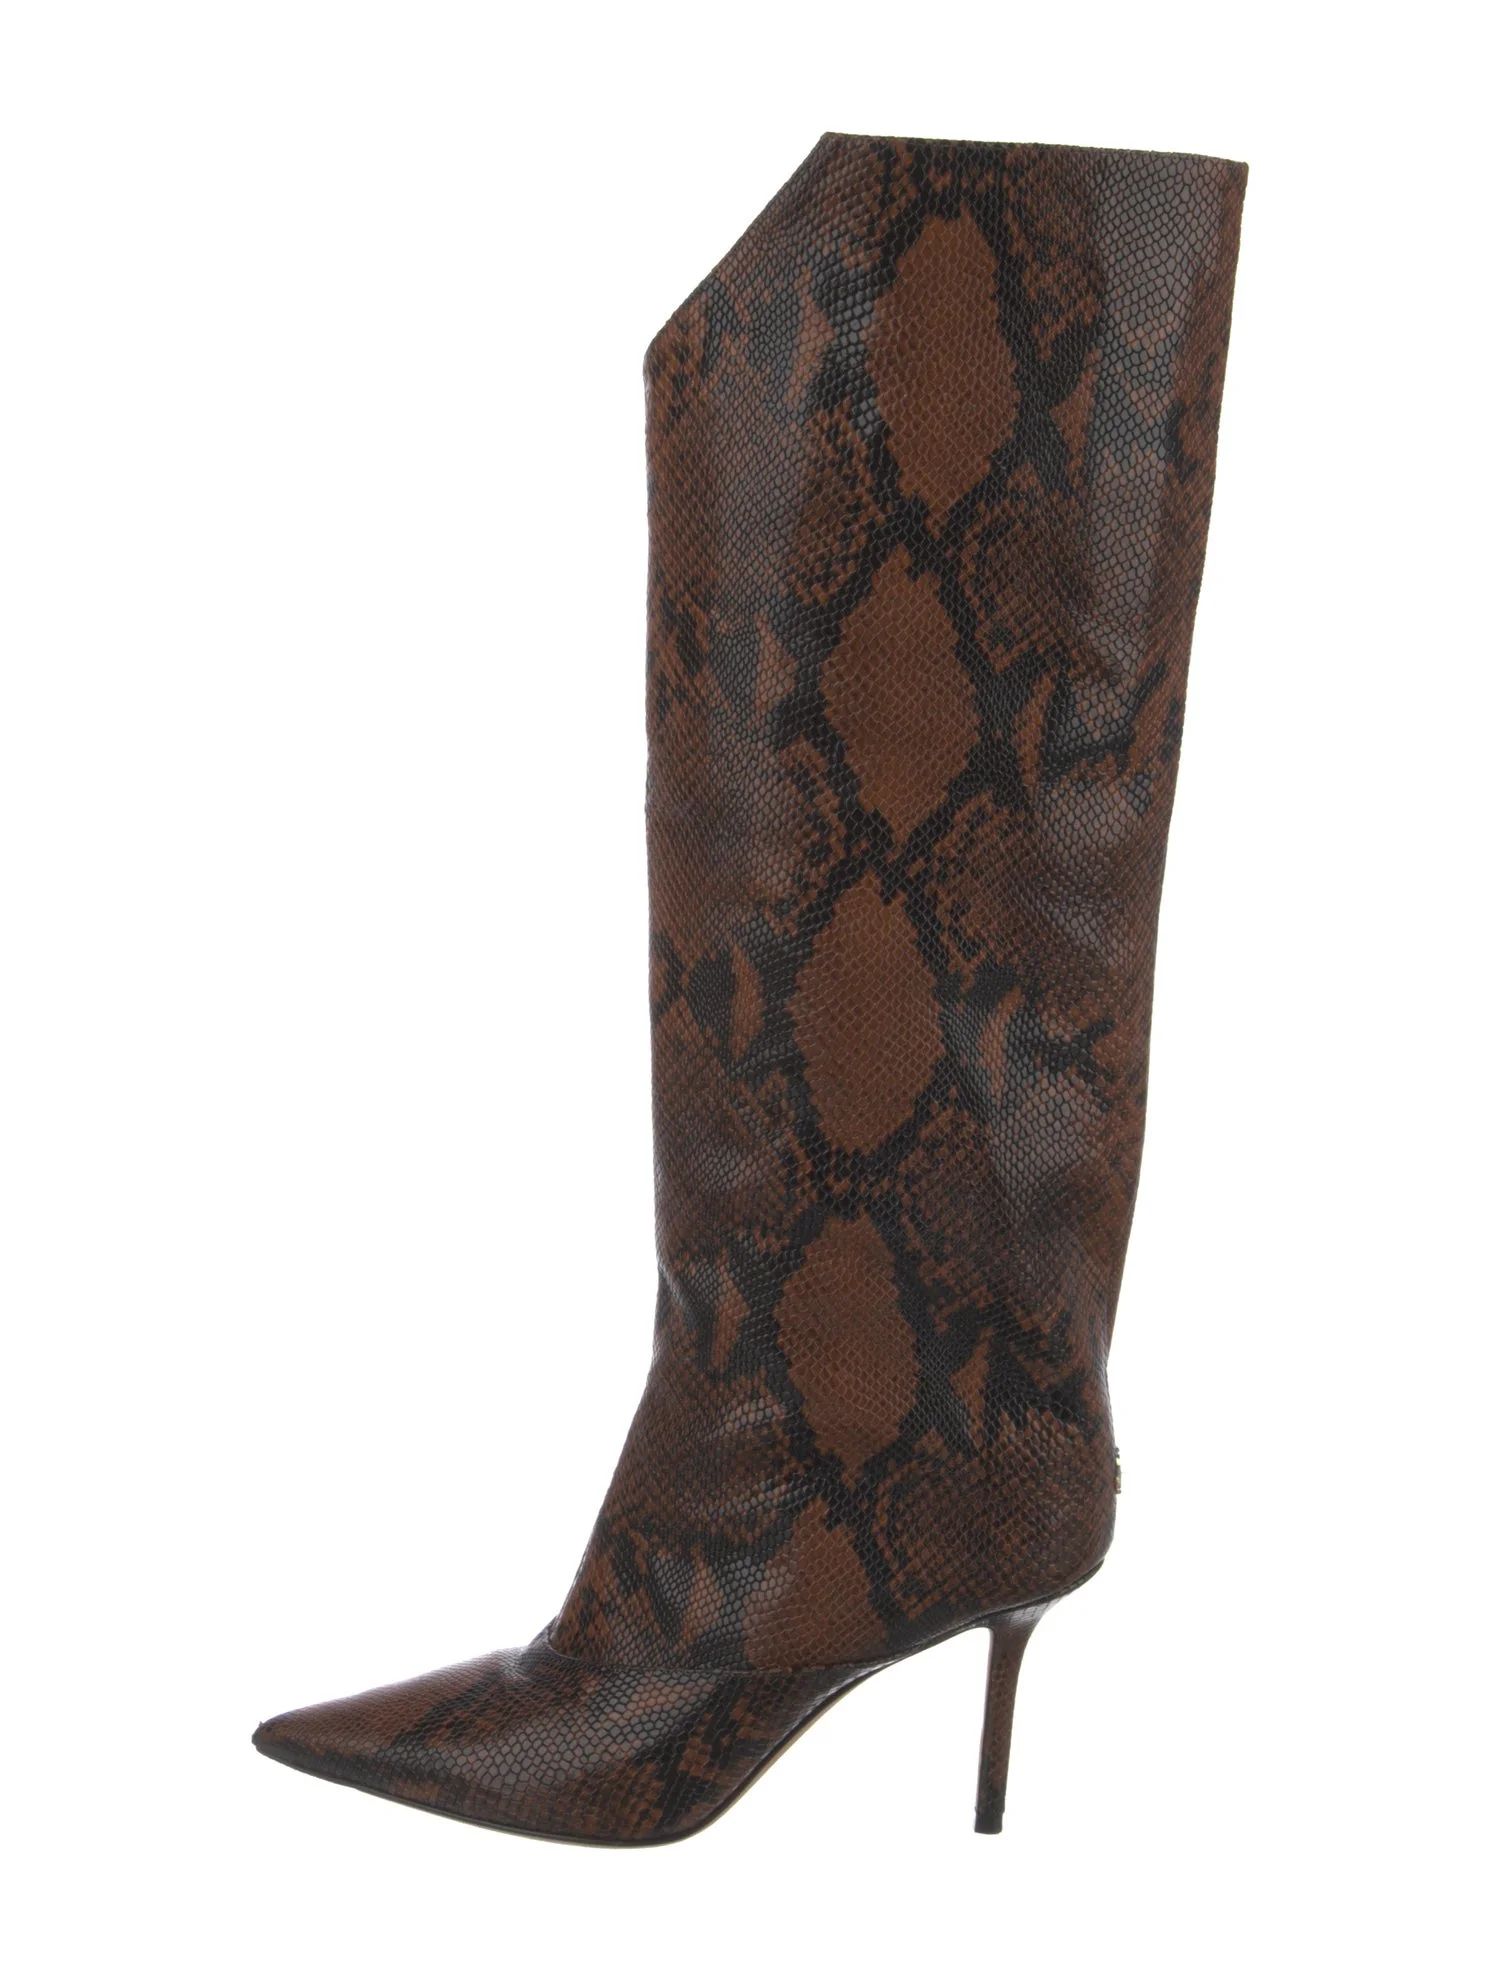 Leather Animal Print Boots | The RealReal